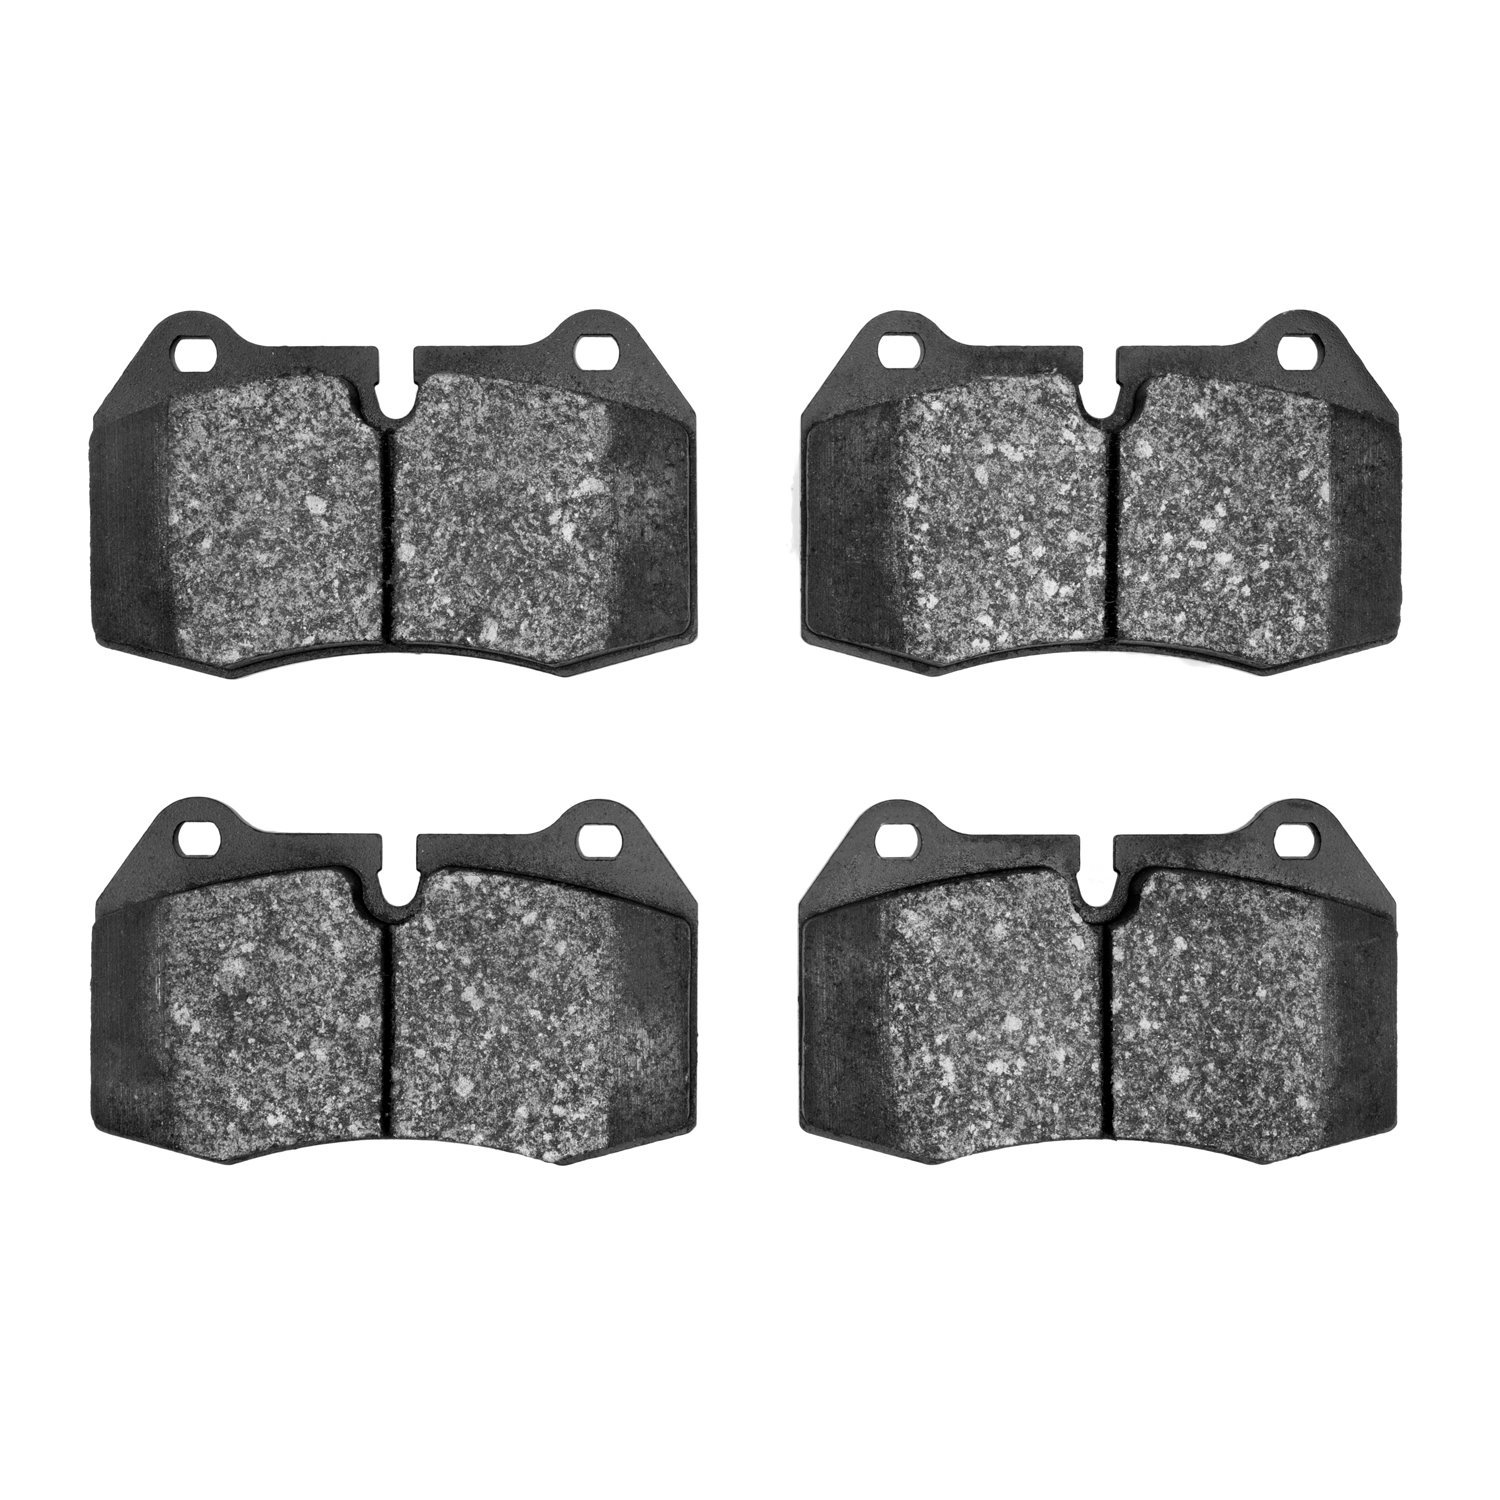 1551-0639-00 5000 Advanced Low-Metallic Brake Pads, 1993-2002 Multiple Makes/Models, Position: Front,Rear